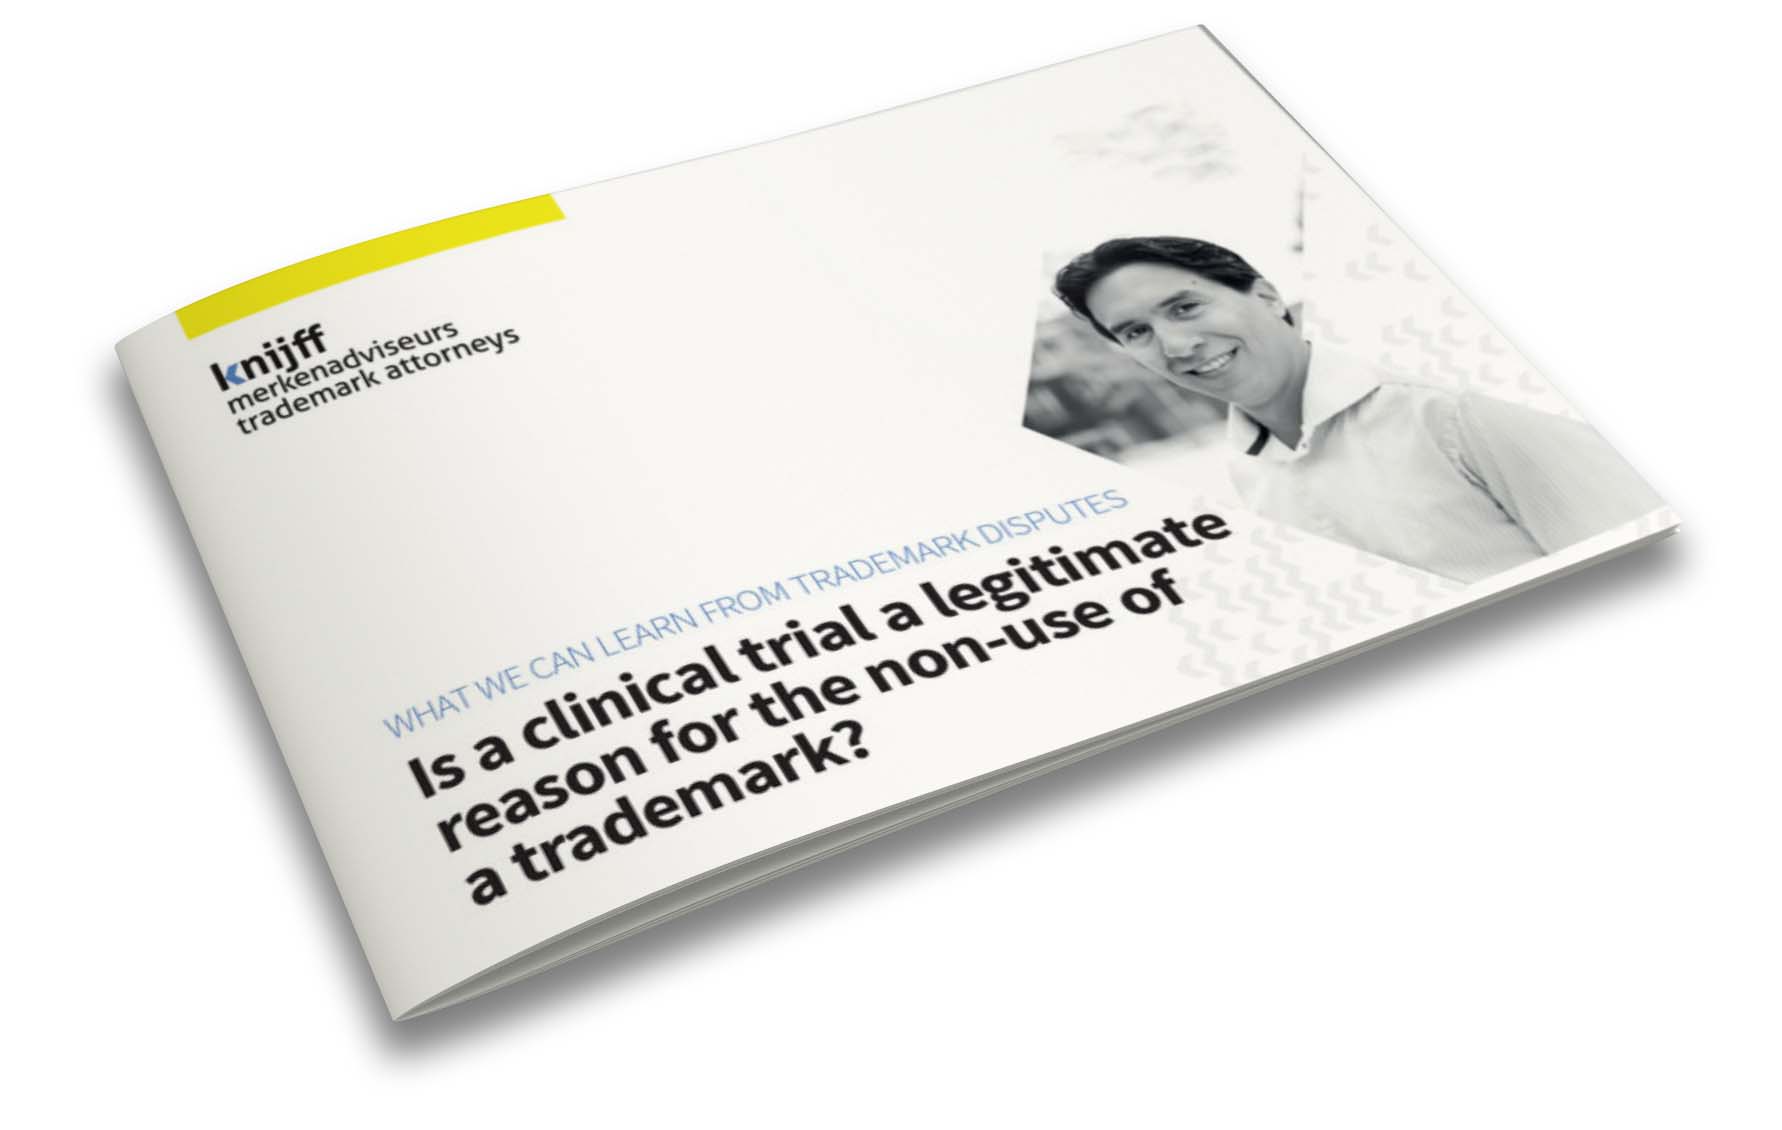 Is a clinical trial a legimate reason for the non-use of a trademark?